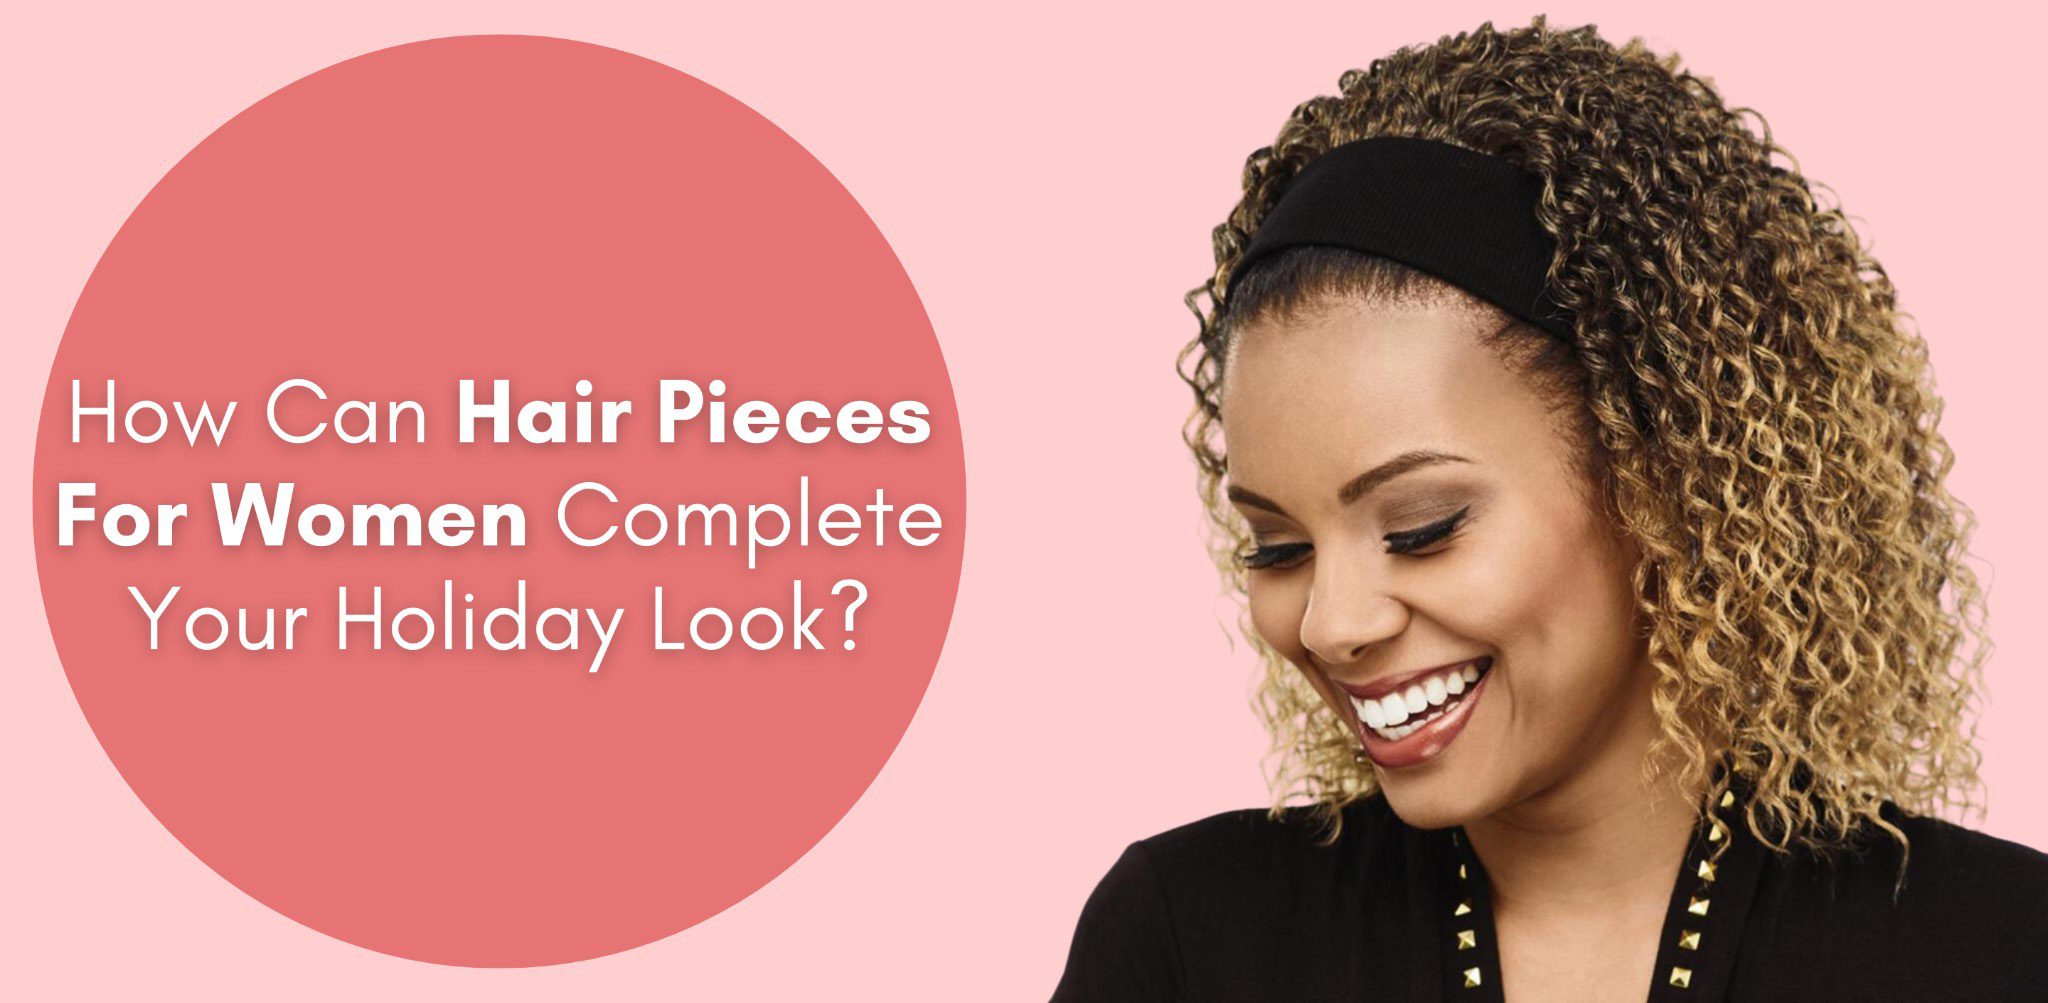 How Can Hair Pieces For Women Complete Your Holiday Look?